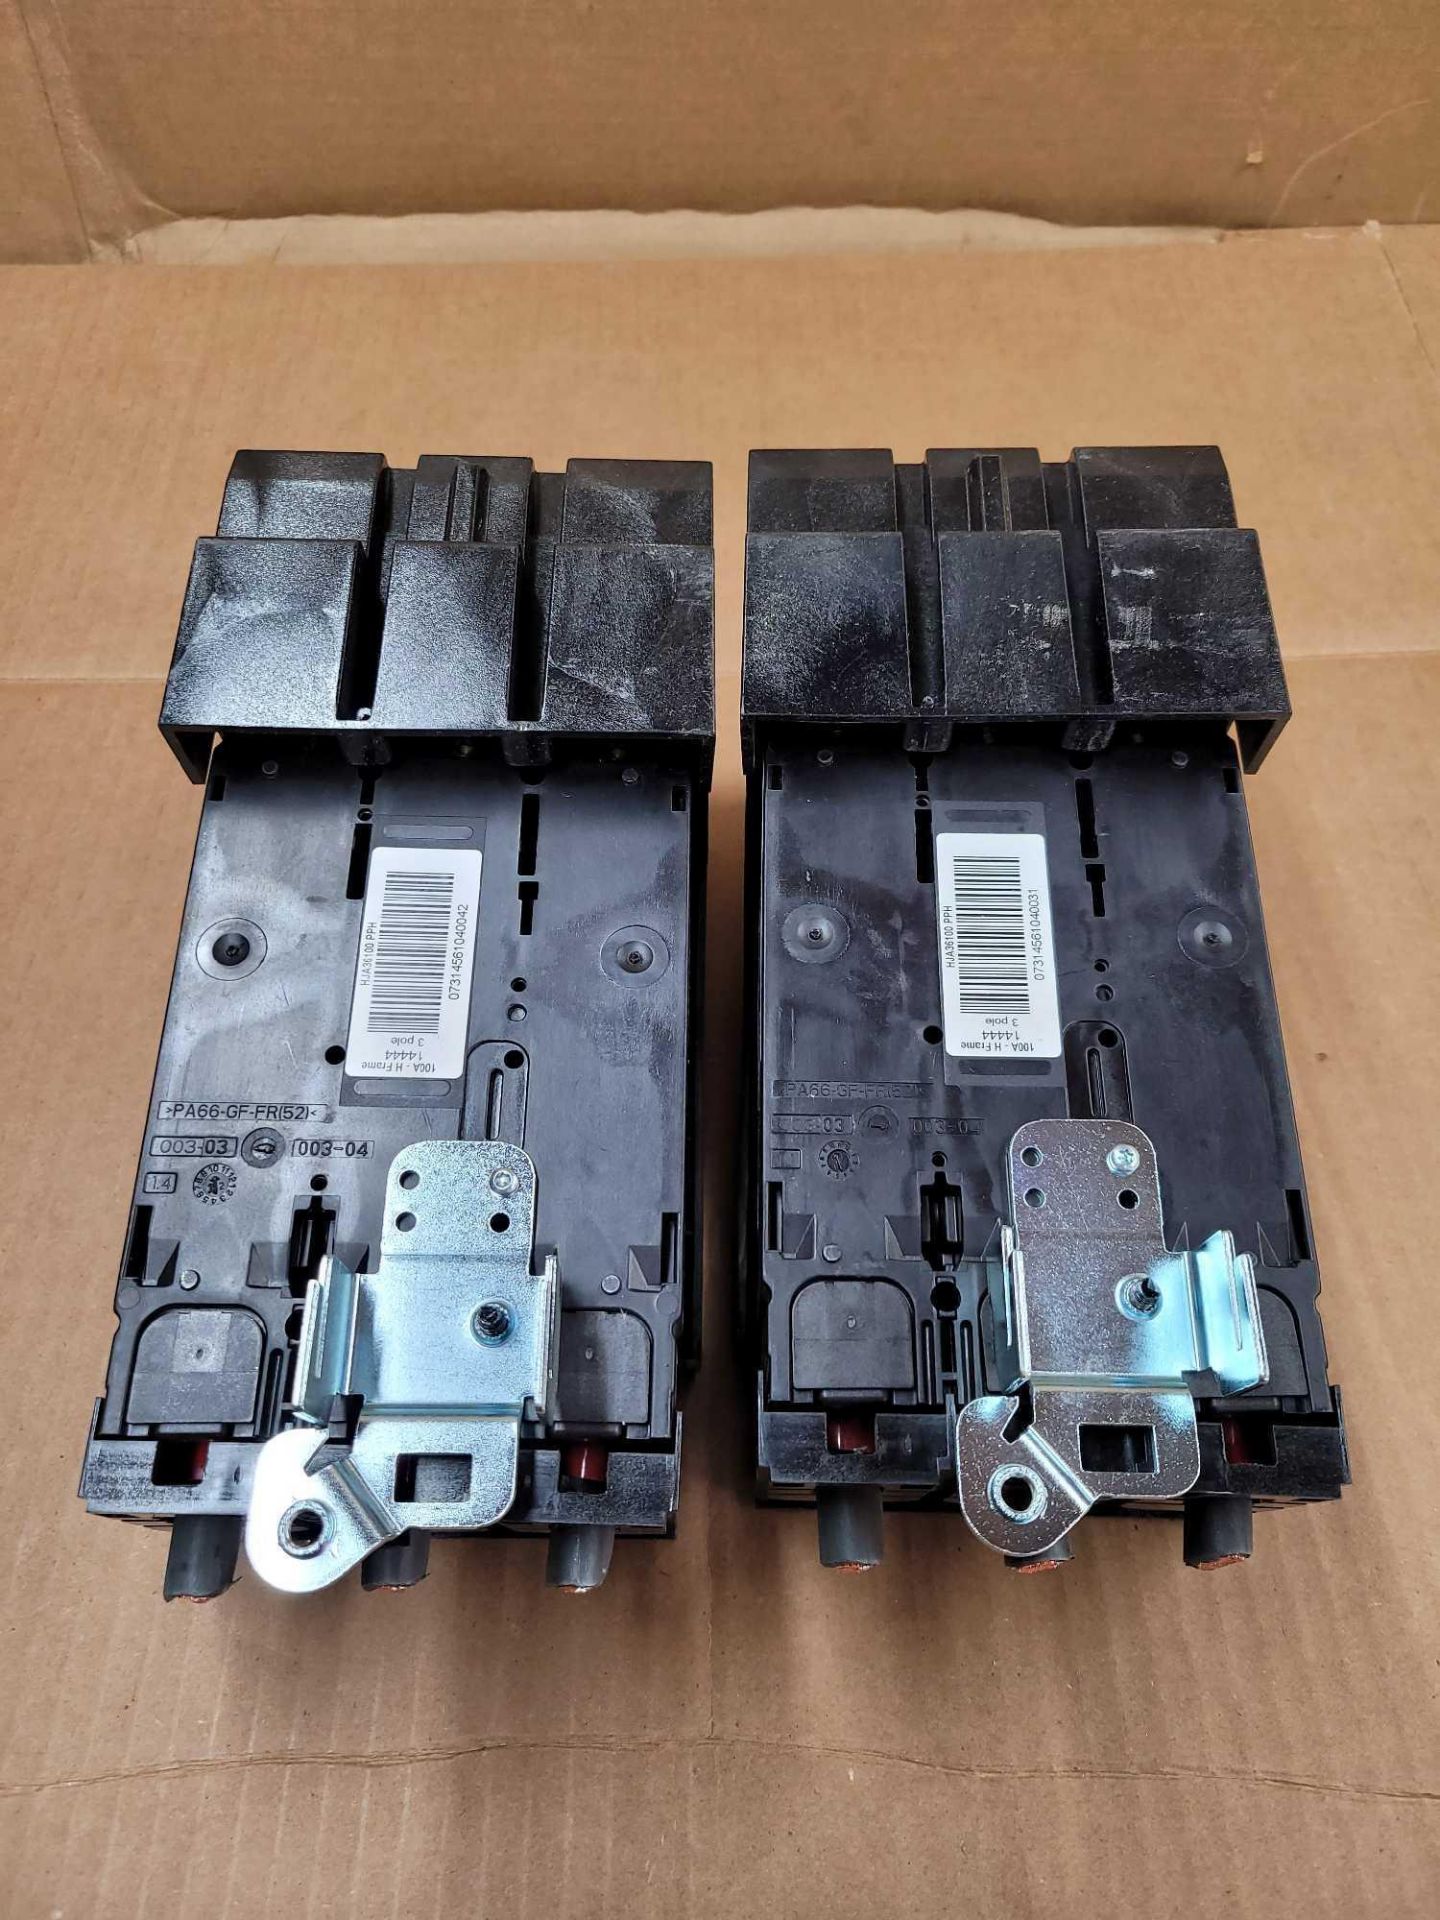 LOT OF 2 SQUARE D HJA36100 / 100 Amp Molded Case Circuit Breaker  /  Lot Weight: 9.4 lbs - Image 3 of 5